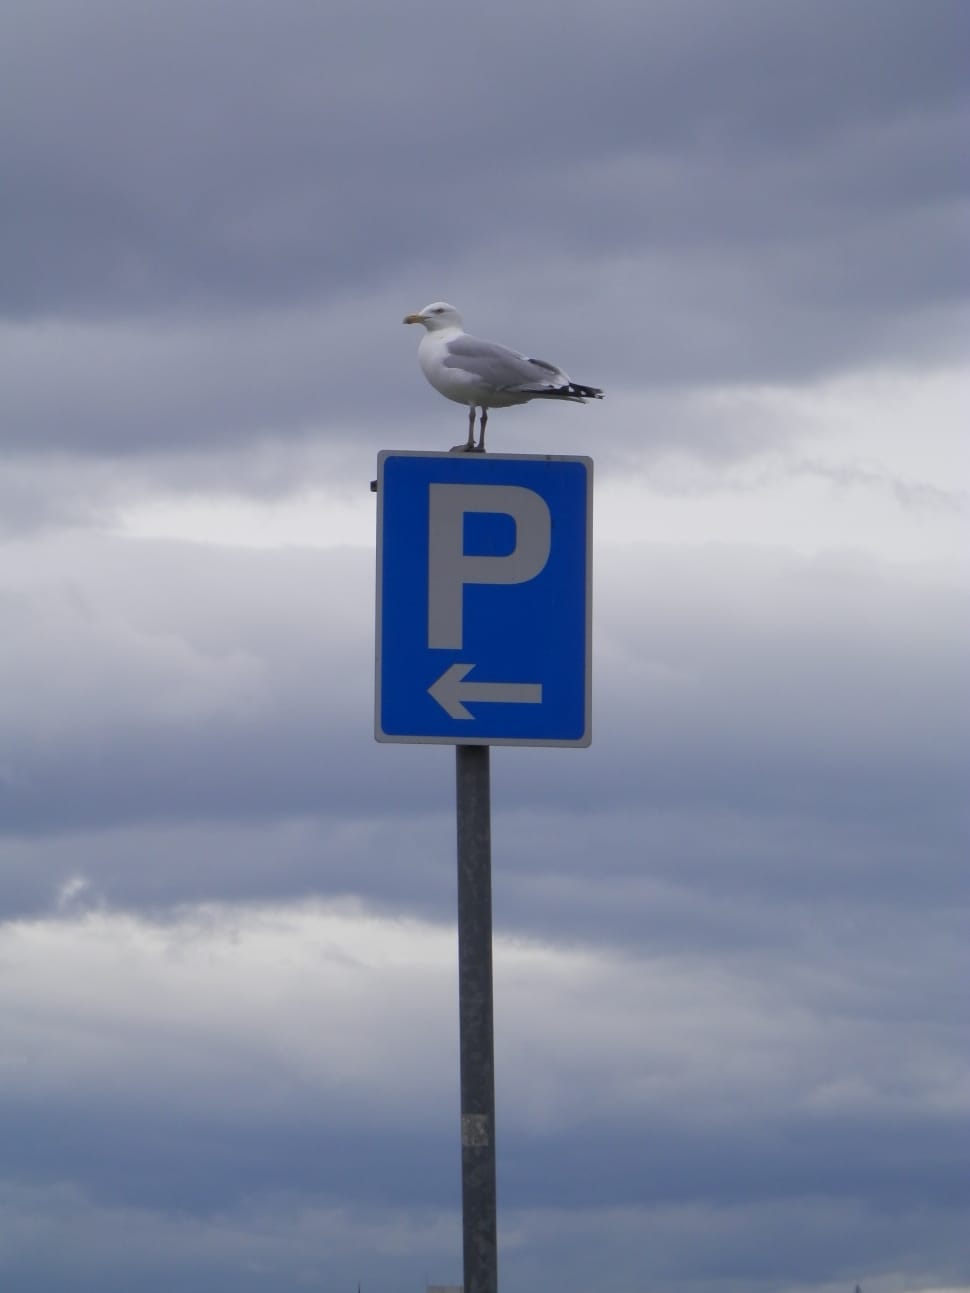 white and gray feathered bird on parking signage preview